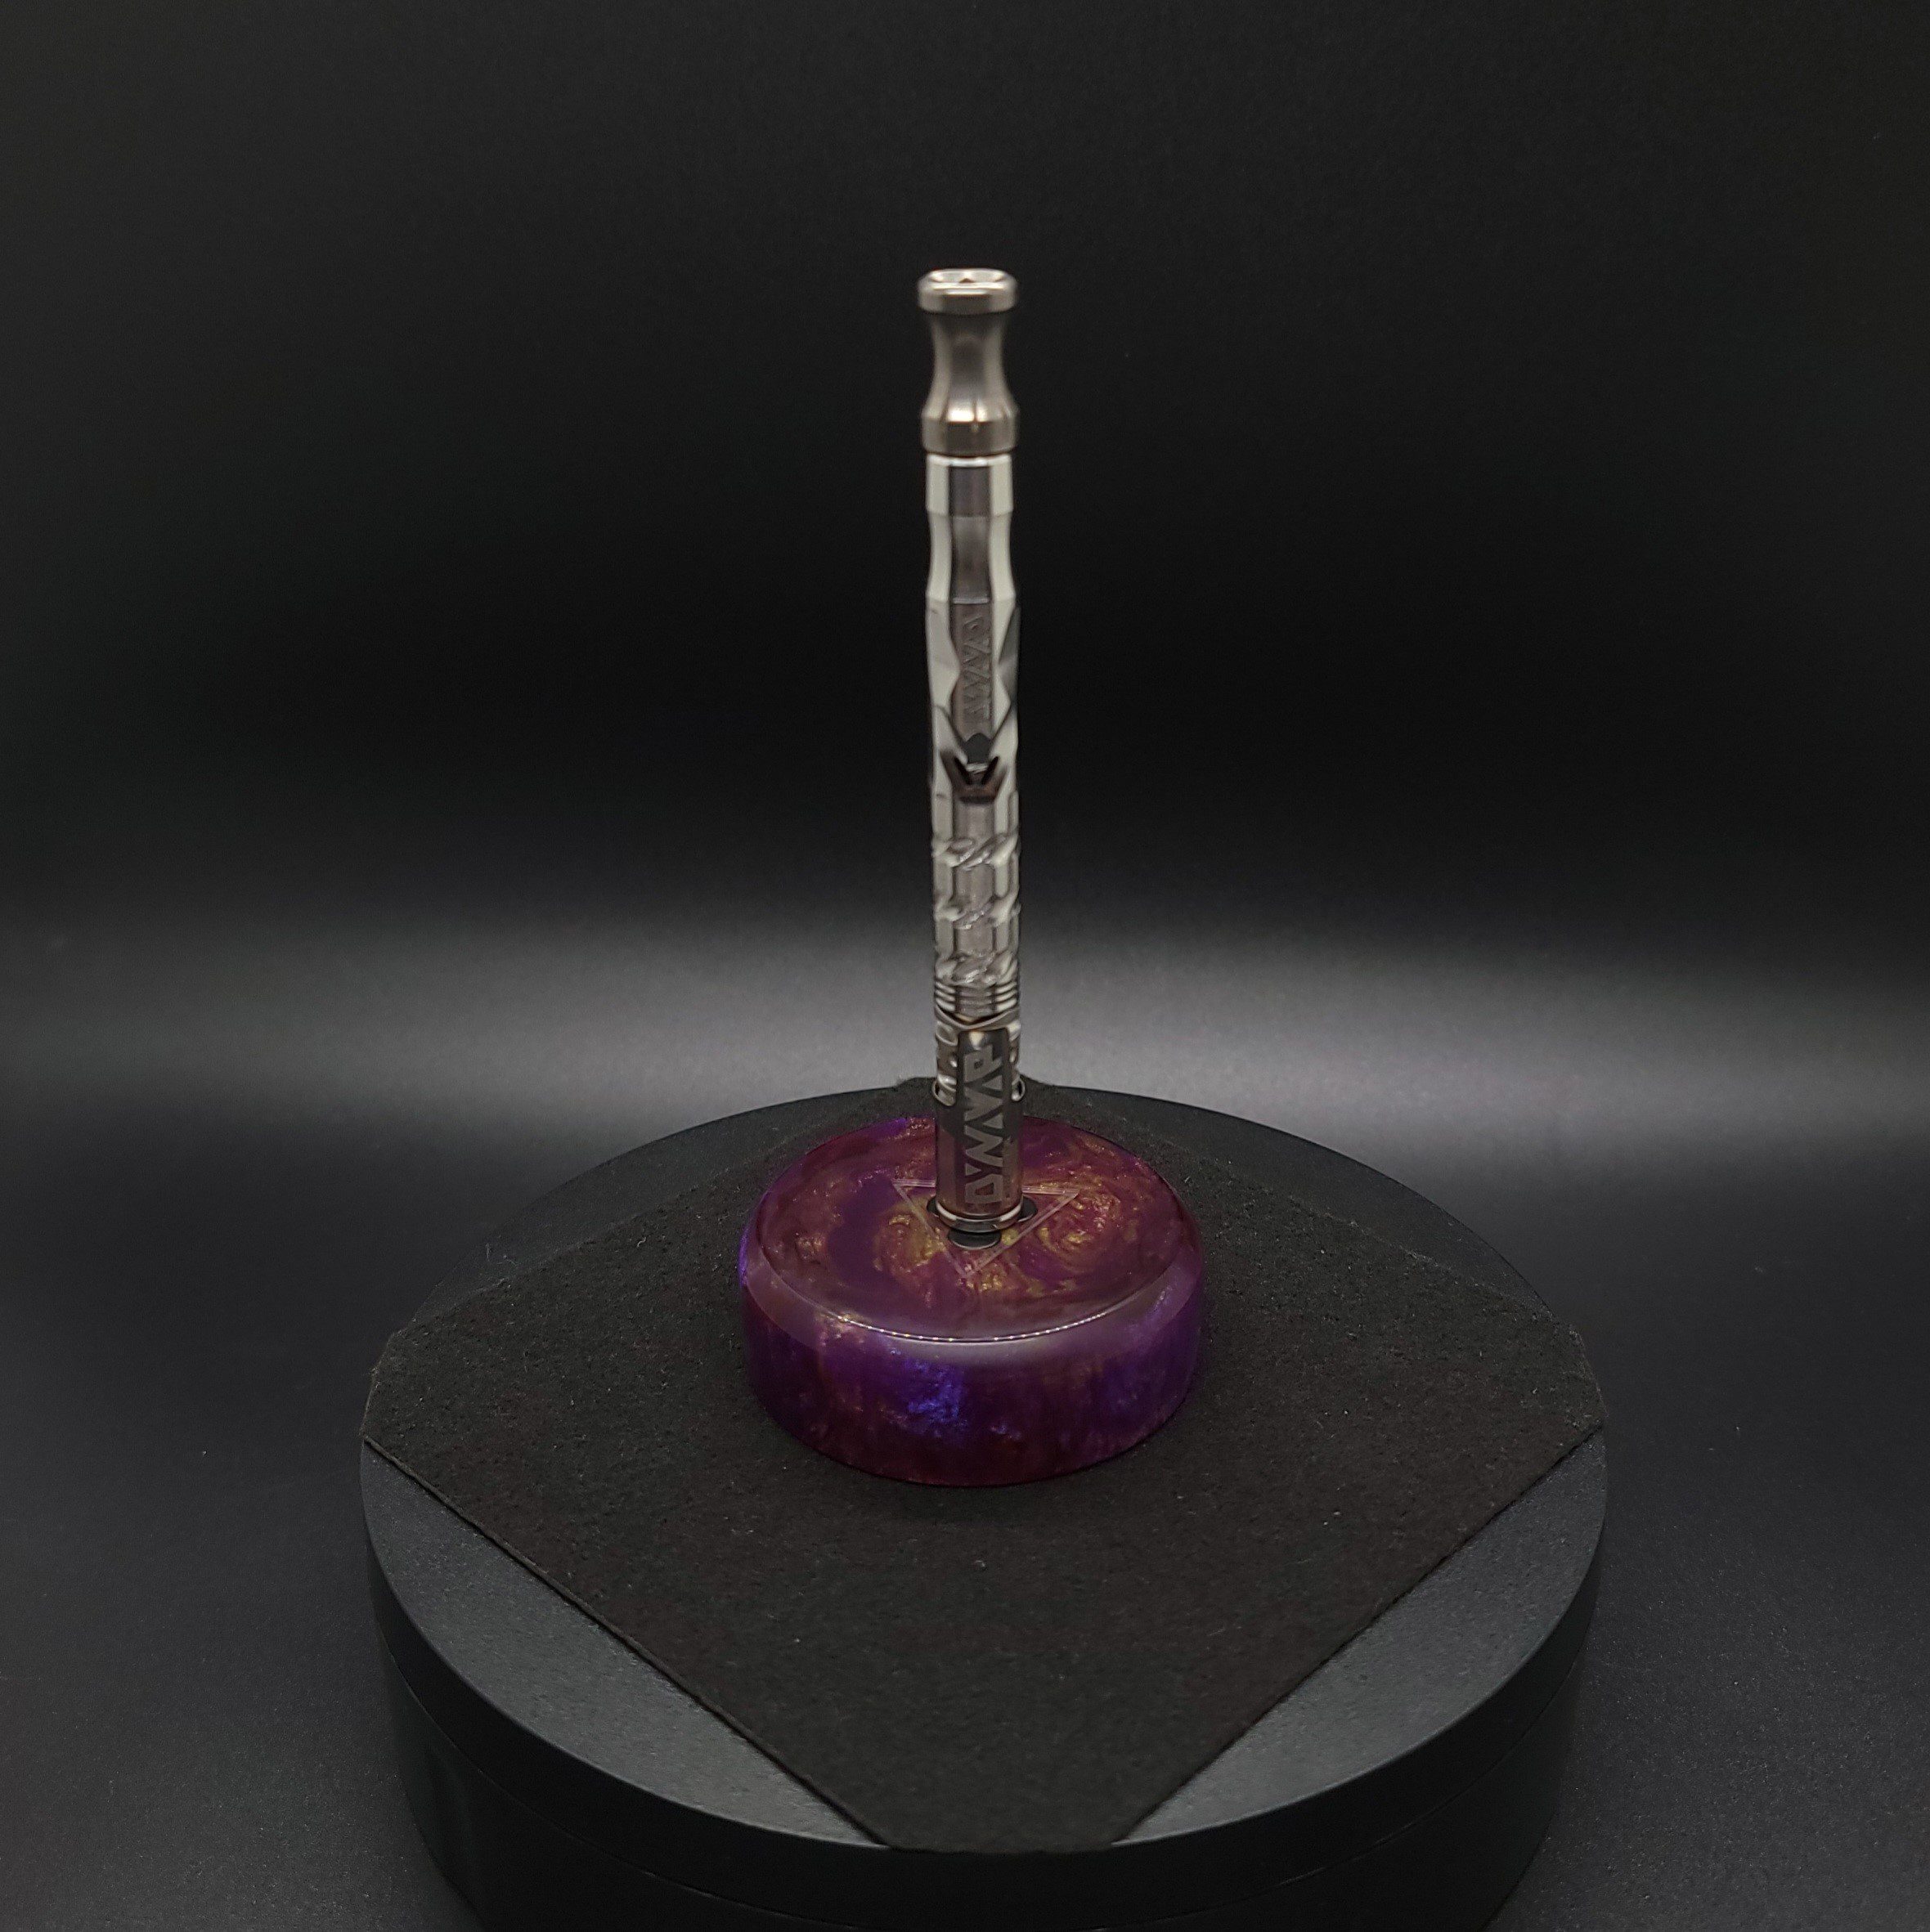 This image portrays DynaPuck-Luminescent Rosium-Dynavap Stem Display by Dovetail Woodwork.